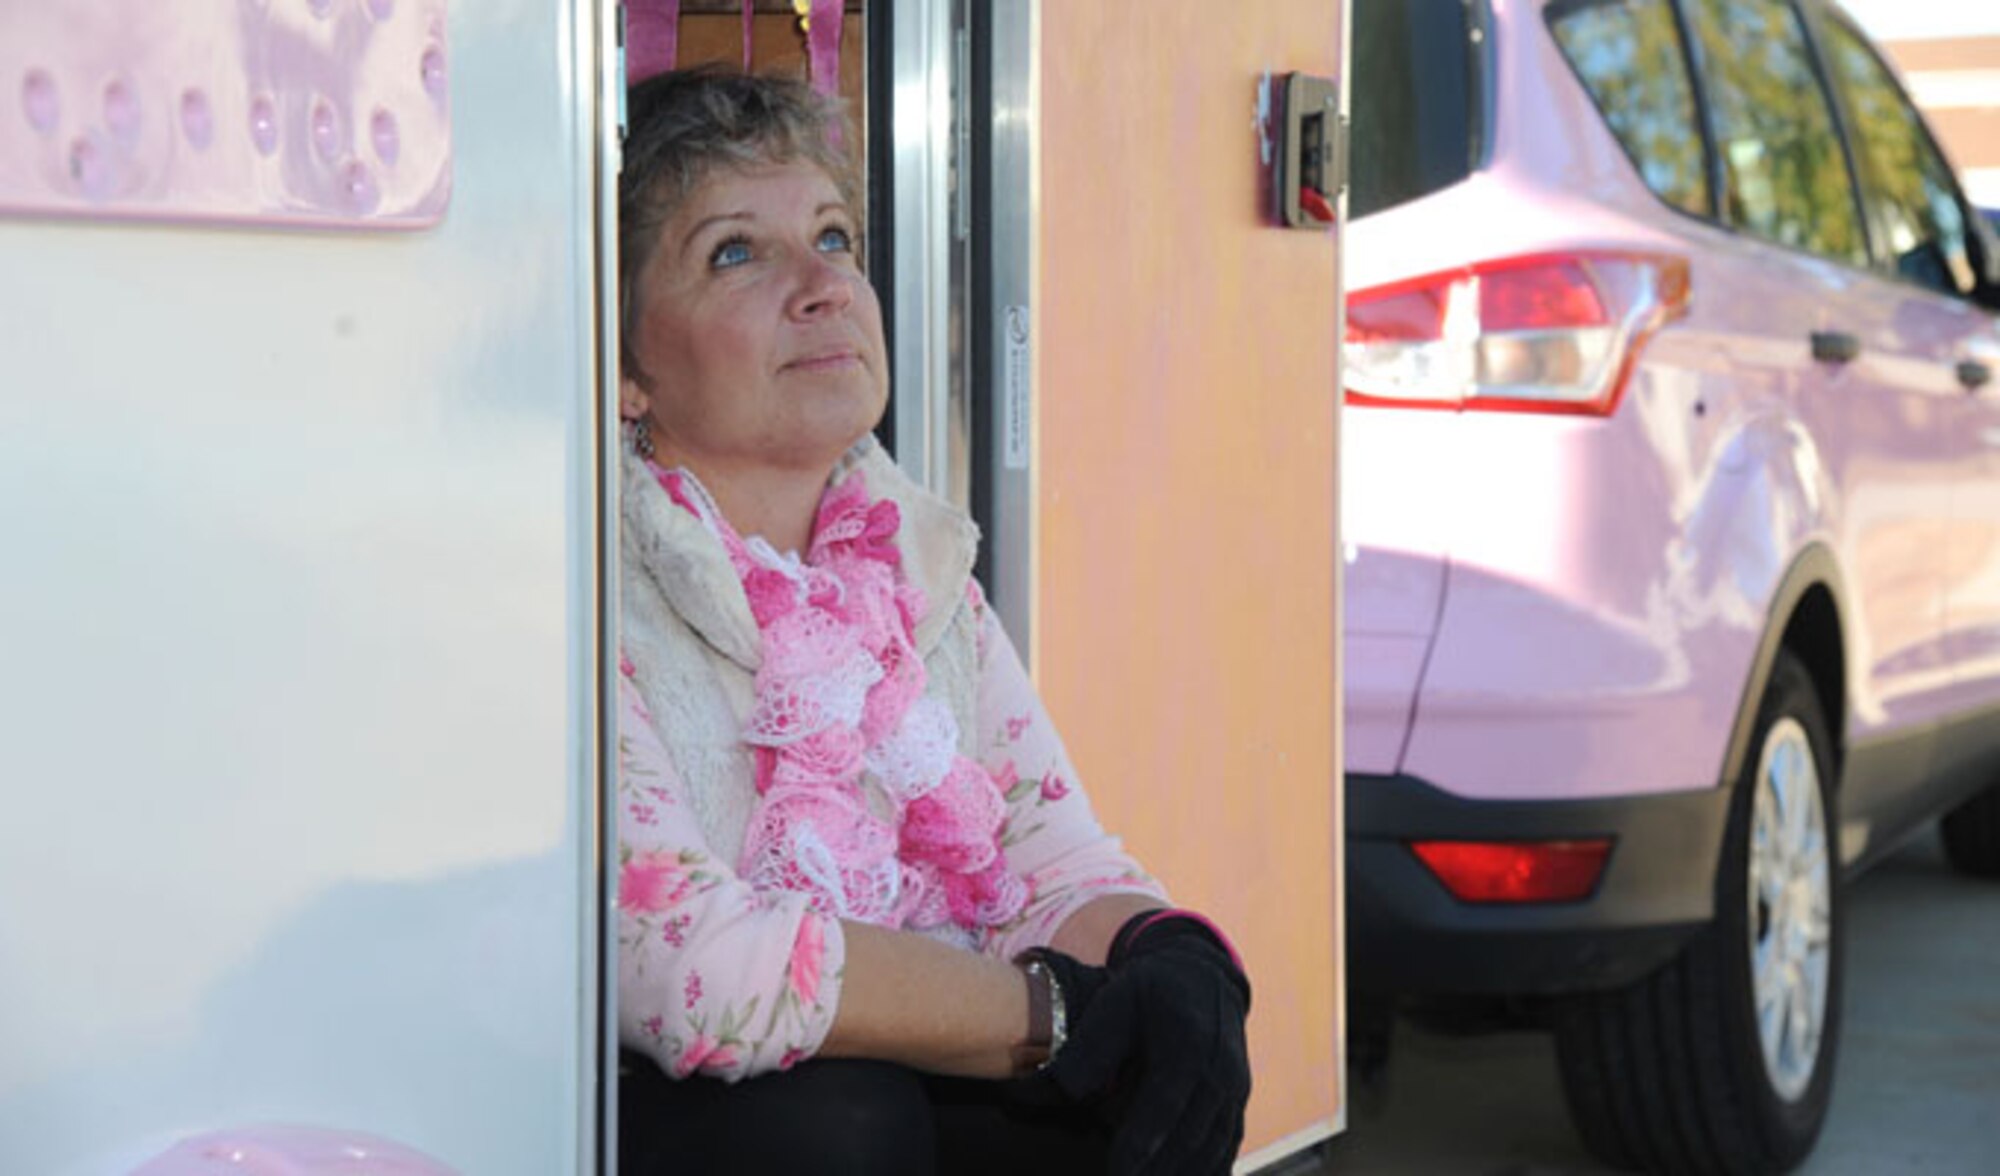 Alison Miller, widow of retired Master Sgt. Chuck Dearing, sits in the doorway of her pink painted teardrop trailer during a travel break Jan. 16, 2014, at the Keesler Air Force Base camp site, Biloxi, Miss. Following Dearing’s retirement, the couple sold their home and belongings and traveled the country for four years staying primarily in base lodgings. Prior to the death of her husband, Miller told him that her intent was to continue traveling in a pink painted car so that he could find her while out on the road. (U.S. Air Force photo/Kemberly Groue)